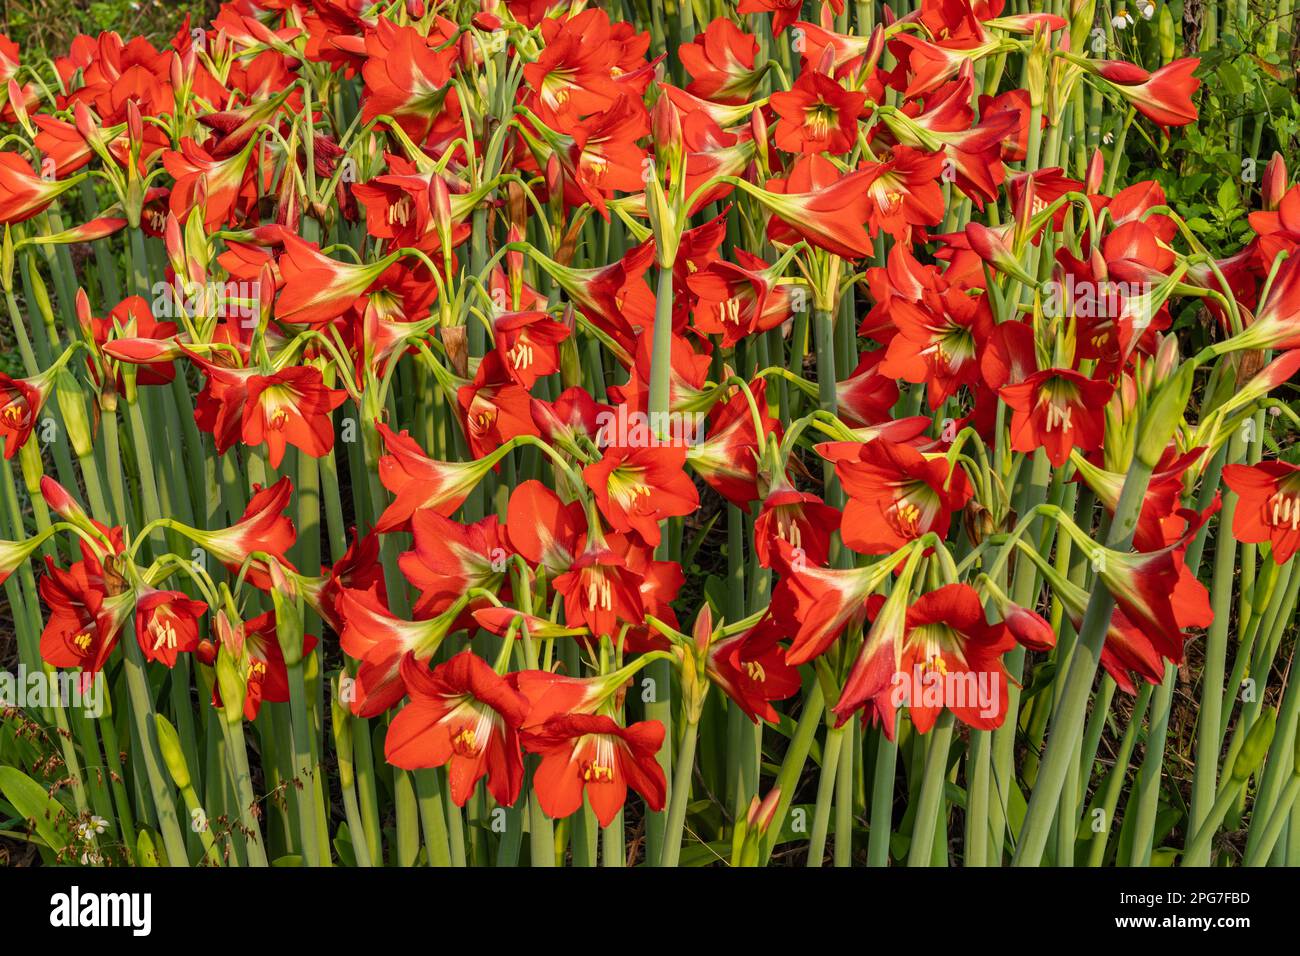 Closeup view of group of colorful red orange flowers of tropical hippeastrum puniceaum aka Barbados lily, Easter lily or cacao lily blooming outdoors Stock Photo